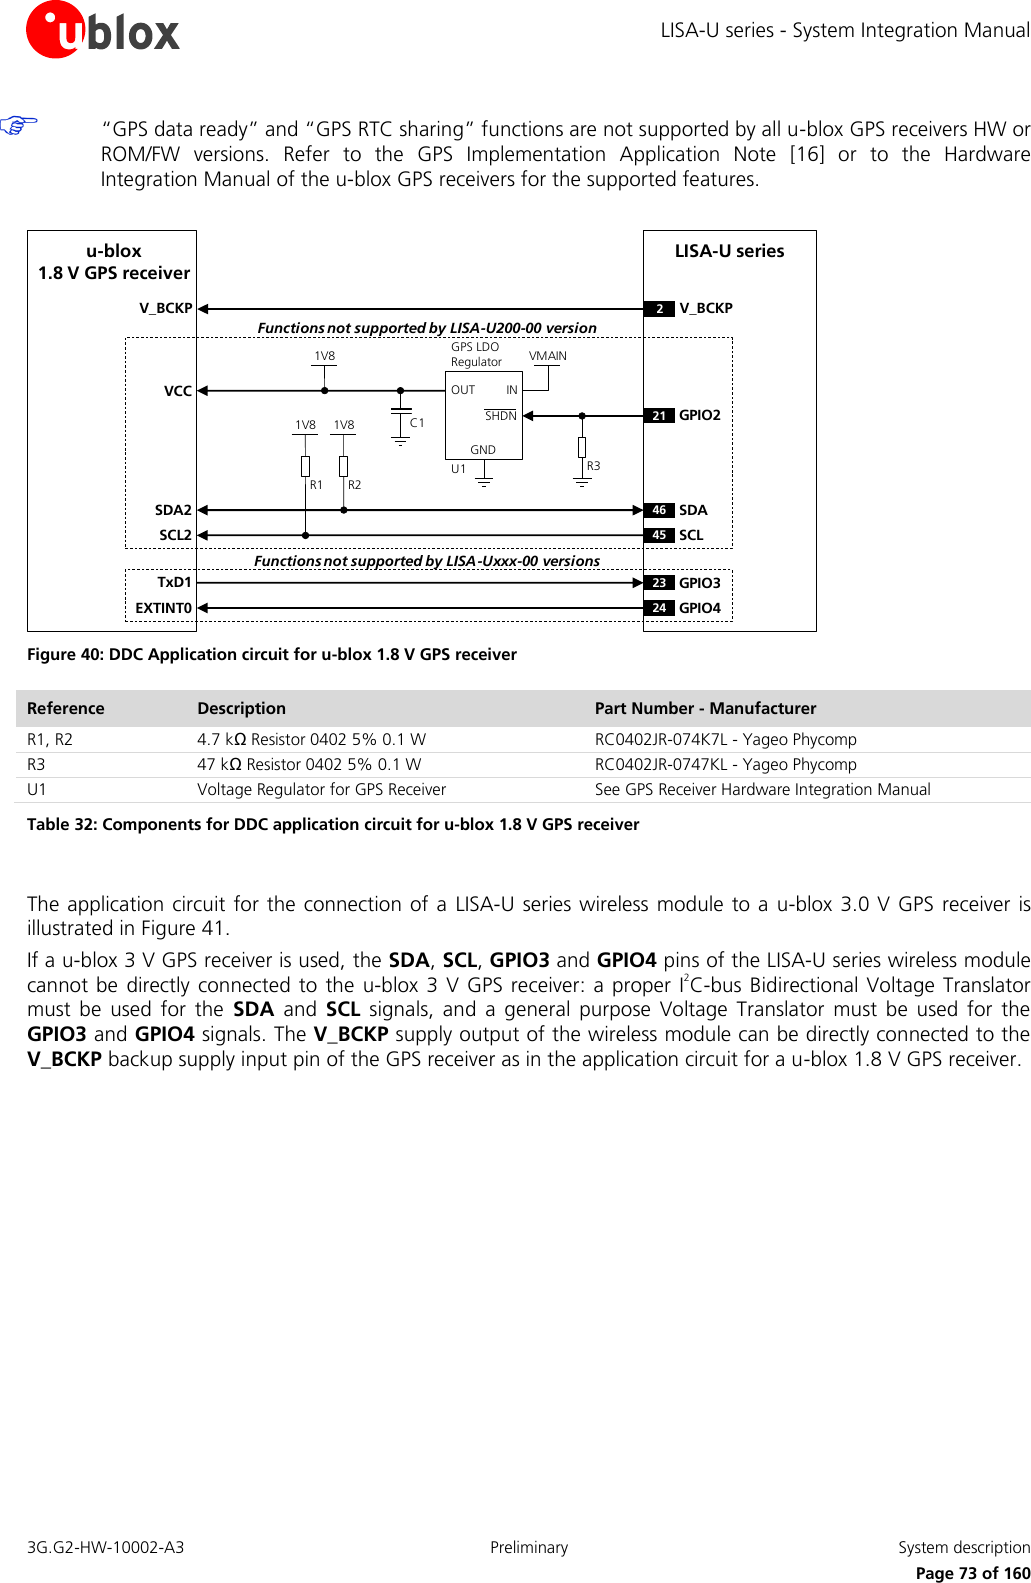 LISA-U series - System Integration Manual 3G.G2-HW-10002-A3  Preliminary  System description      Page 73 of 160  “GPS data ready” and “GPS RTC sharing” functions are not supported by all u-blox GPS receivers HW or ROM/FW  versions.  Refer  to  the  GPS  Implementation  Application  Note  [16]  or  to  the  Hardware Integration Manual of the u-blox GPS receivers for the supported features.  Functions not supported by LISA-Uxxx-00 versionsLISA-U seriesR1INOUTGNDGPS LDORegulatorSHDNu-blox1.8 V GPS receiverSDA2SCL2R21V8 1V8VMAIN1V8U121 GPIO2SDASCLC1TxD1EXTINT0GPIO3GPIO446452324VCCR3V_BCKP V_BCKP2Functions not supported by LISA-U200-00 version Figure 40: DDC Application circuit for u-blox 1.8 V GPS receiver Reference Description Part Number - Manufacturer R1, R2  4.7 kΩ Resistor 0402 5% 0.1 W  RC0402JR-074K7L - Yageo Phycomp R3 47 kΩ Resistor 0402 5% 0.1 W  RC0402JR-0747KL - Yageo Phycomp U1 Voltage Regulator for GPS Receiver See GPS Receiver Hardware Integration Manual Table 32: Components for DDC application circuit for u-blox 1.8 V GPS receiver  The application circuit  for the connection of  a  LISA-U series  wireless module to a  u-blox 3.0 V GPS  receiver is illustrated in Figure 41. If a u-blox 3 V GPS receiver is used, the SDA, SCL, GPIO3 and GPIO4 pins of the LISA-U series wireless module cannot be  directly connected  to the  u-blox 3  V GPS receiver: a proper  I2C-bus Bidirectional Voltage Translator must  be  used  for  the  SDA  and  SCL  signals,  and  a  general  purpose  Voltage  Translator  must  be  used  for  the GPIO3 and GPIO4 signals. The V_BCKP supply output of the wireless module can be directly connected to the V_BCKP backup supply input pin of the GPS receiver as in the application circuit for a u-blox 1.8 V GPS receiver.  